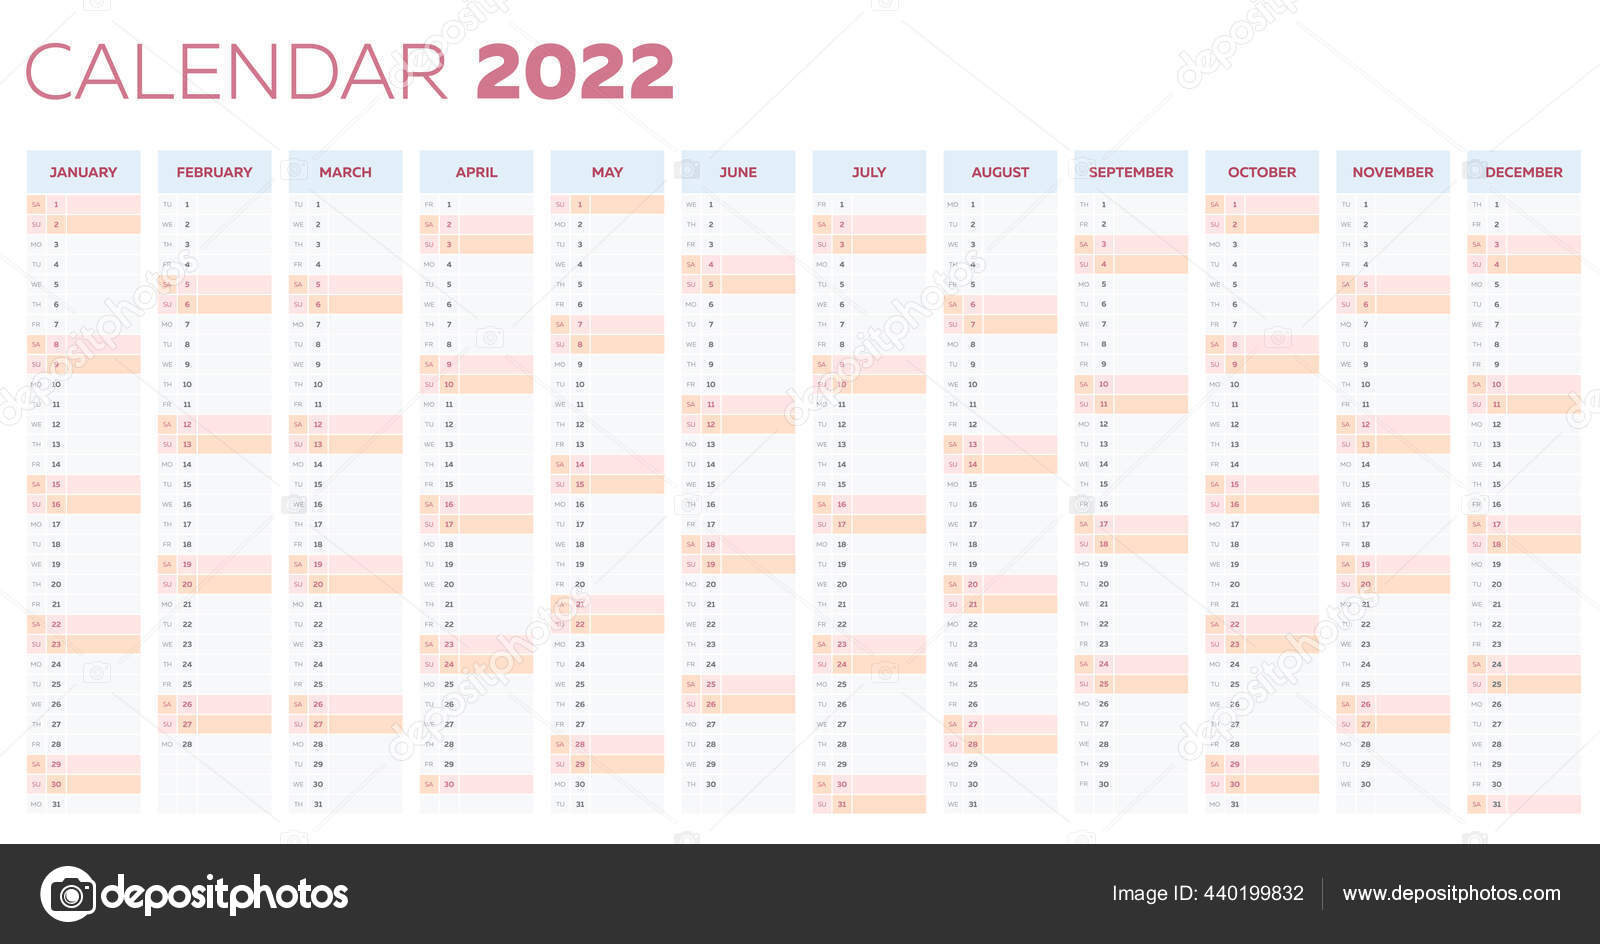 The 2022 Calendar Planner Template With Vertical Monthly Columns Stock Vector Image By C Mooo 440199832